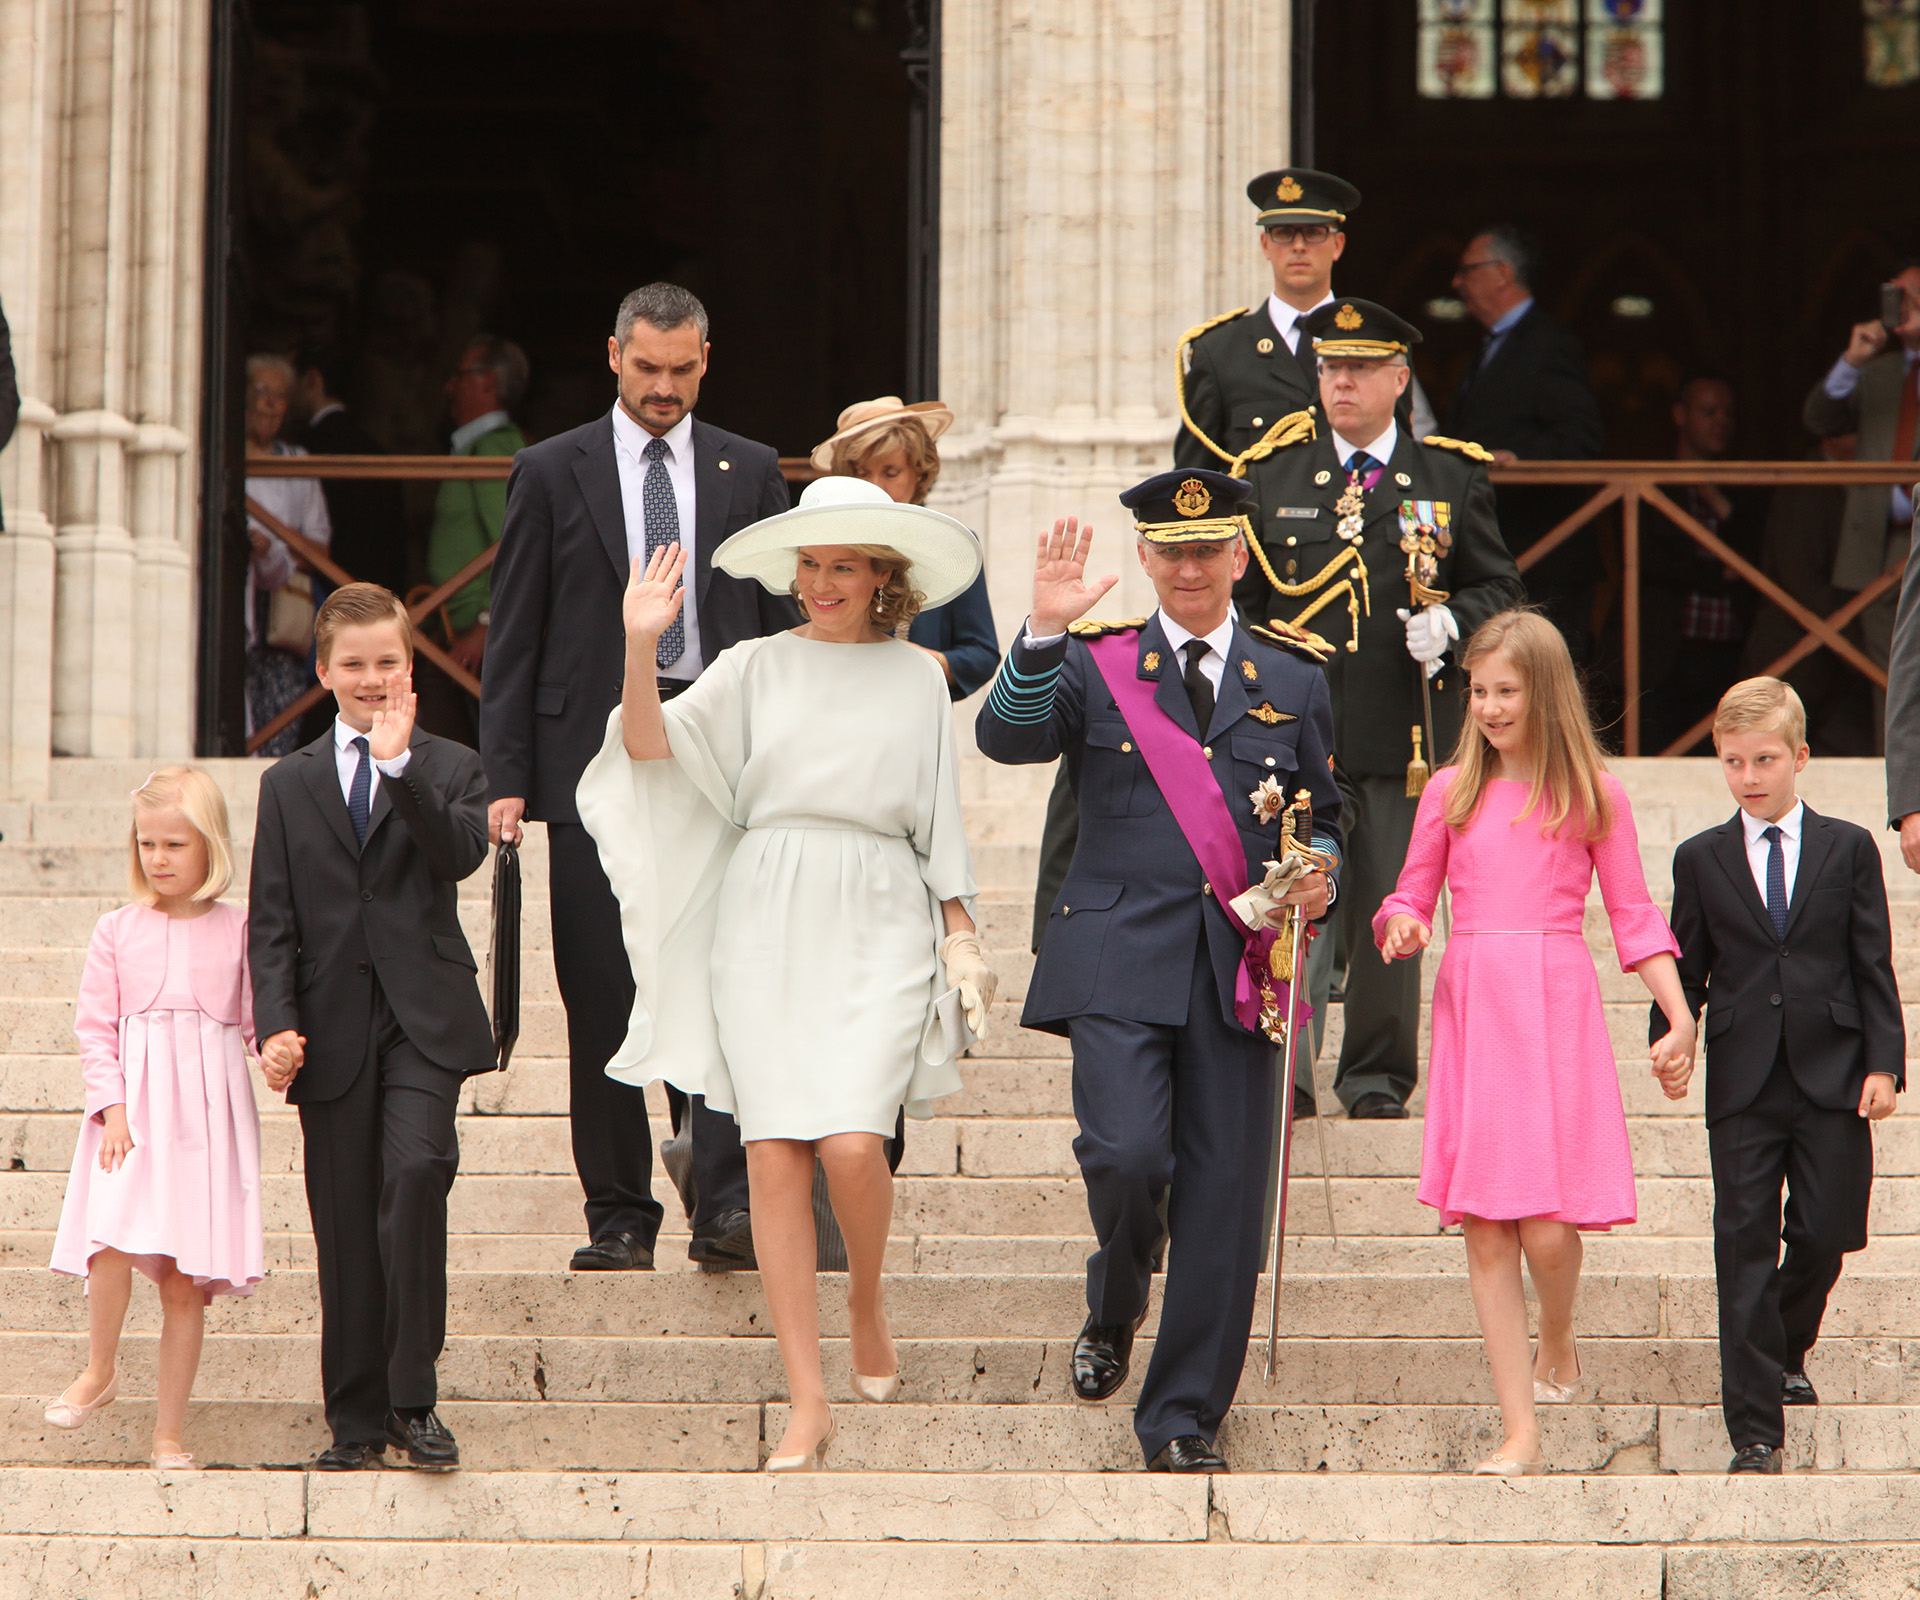 Queen Mathilde and King Philippe celebrate Belgium’s National Day